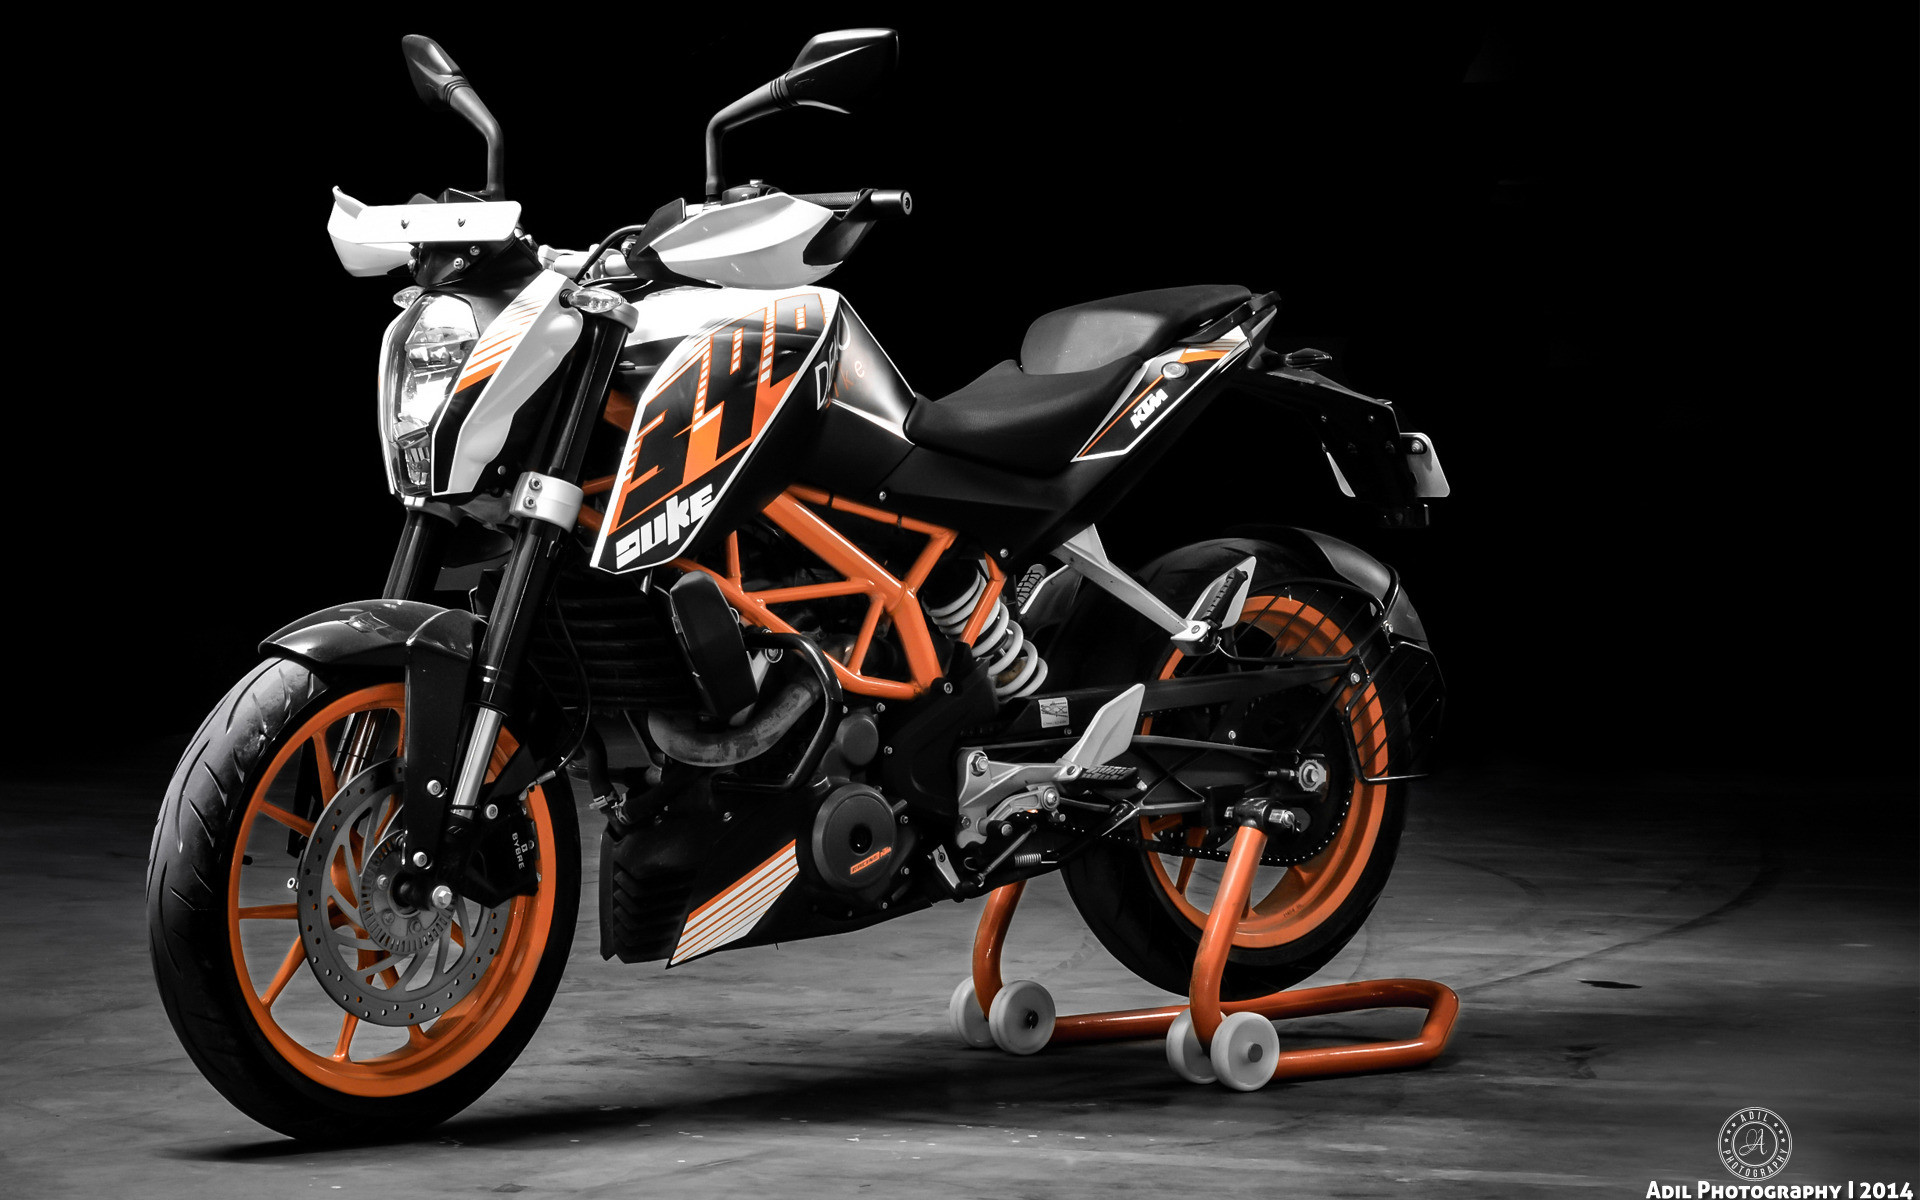 1920x1200 Search Results for “ktm duke 390 black hd wallpaper” – Adorable Wallpapers